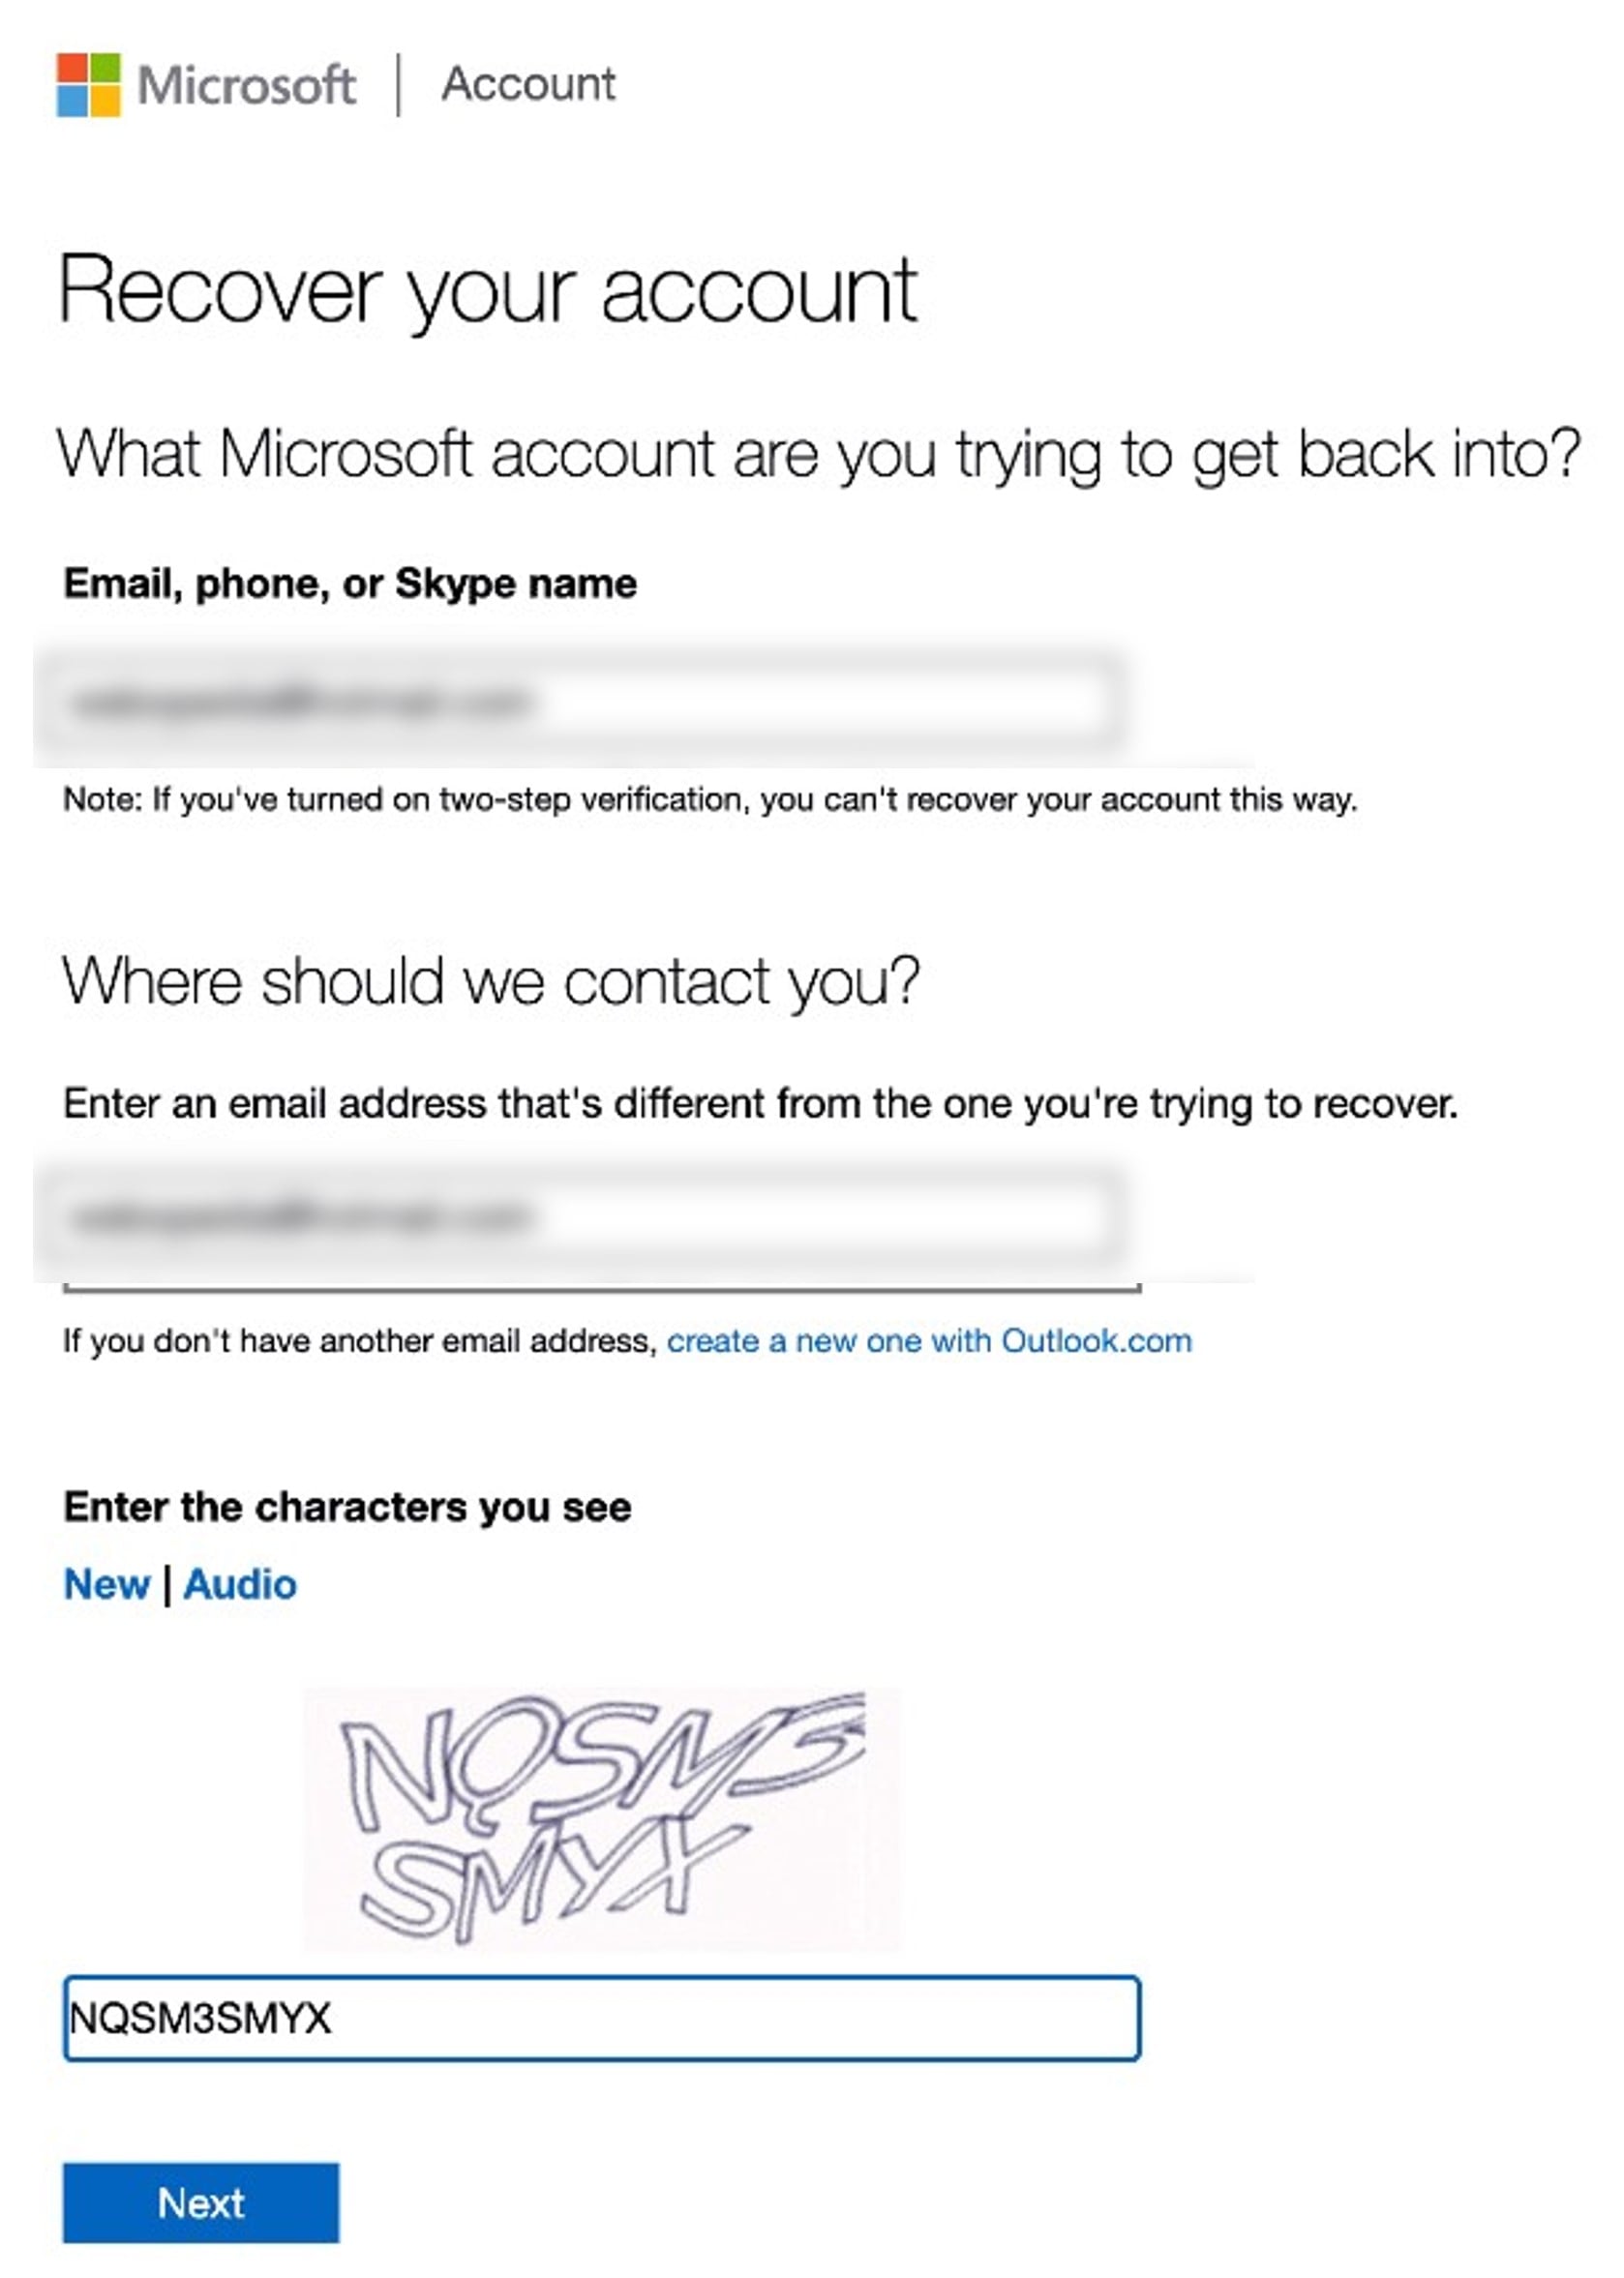 recover microsoft account